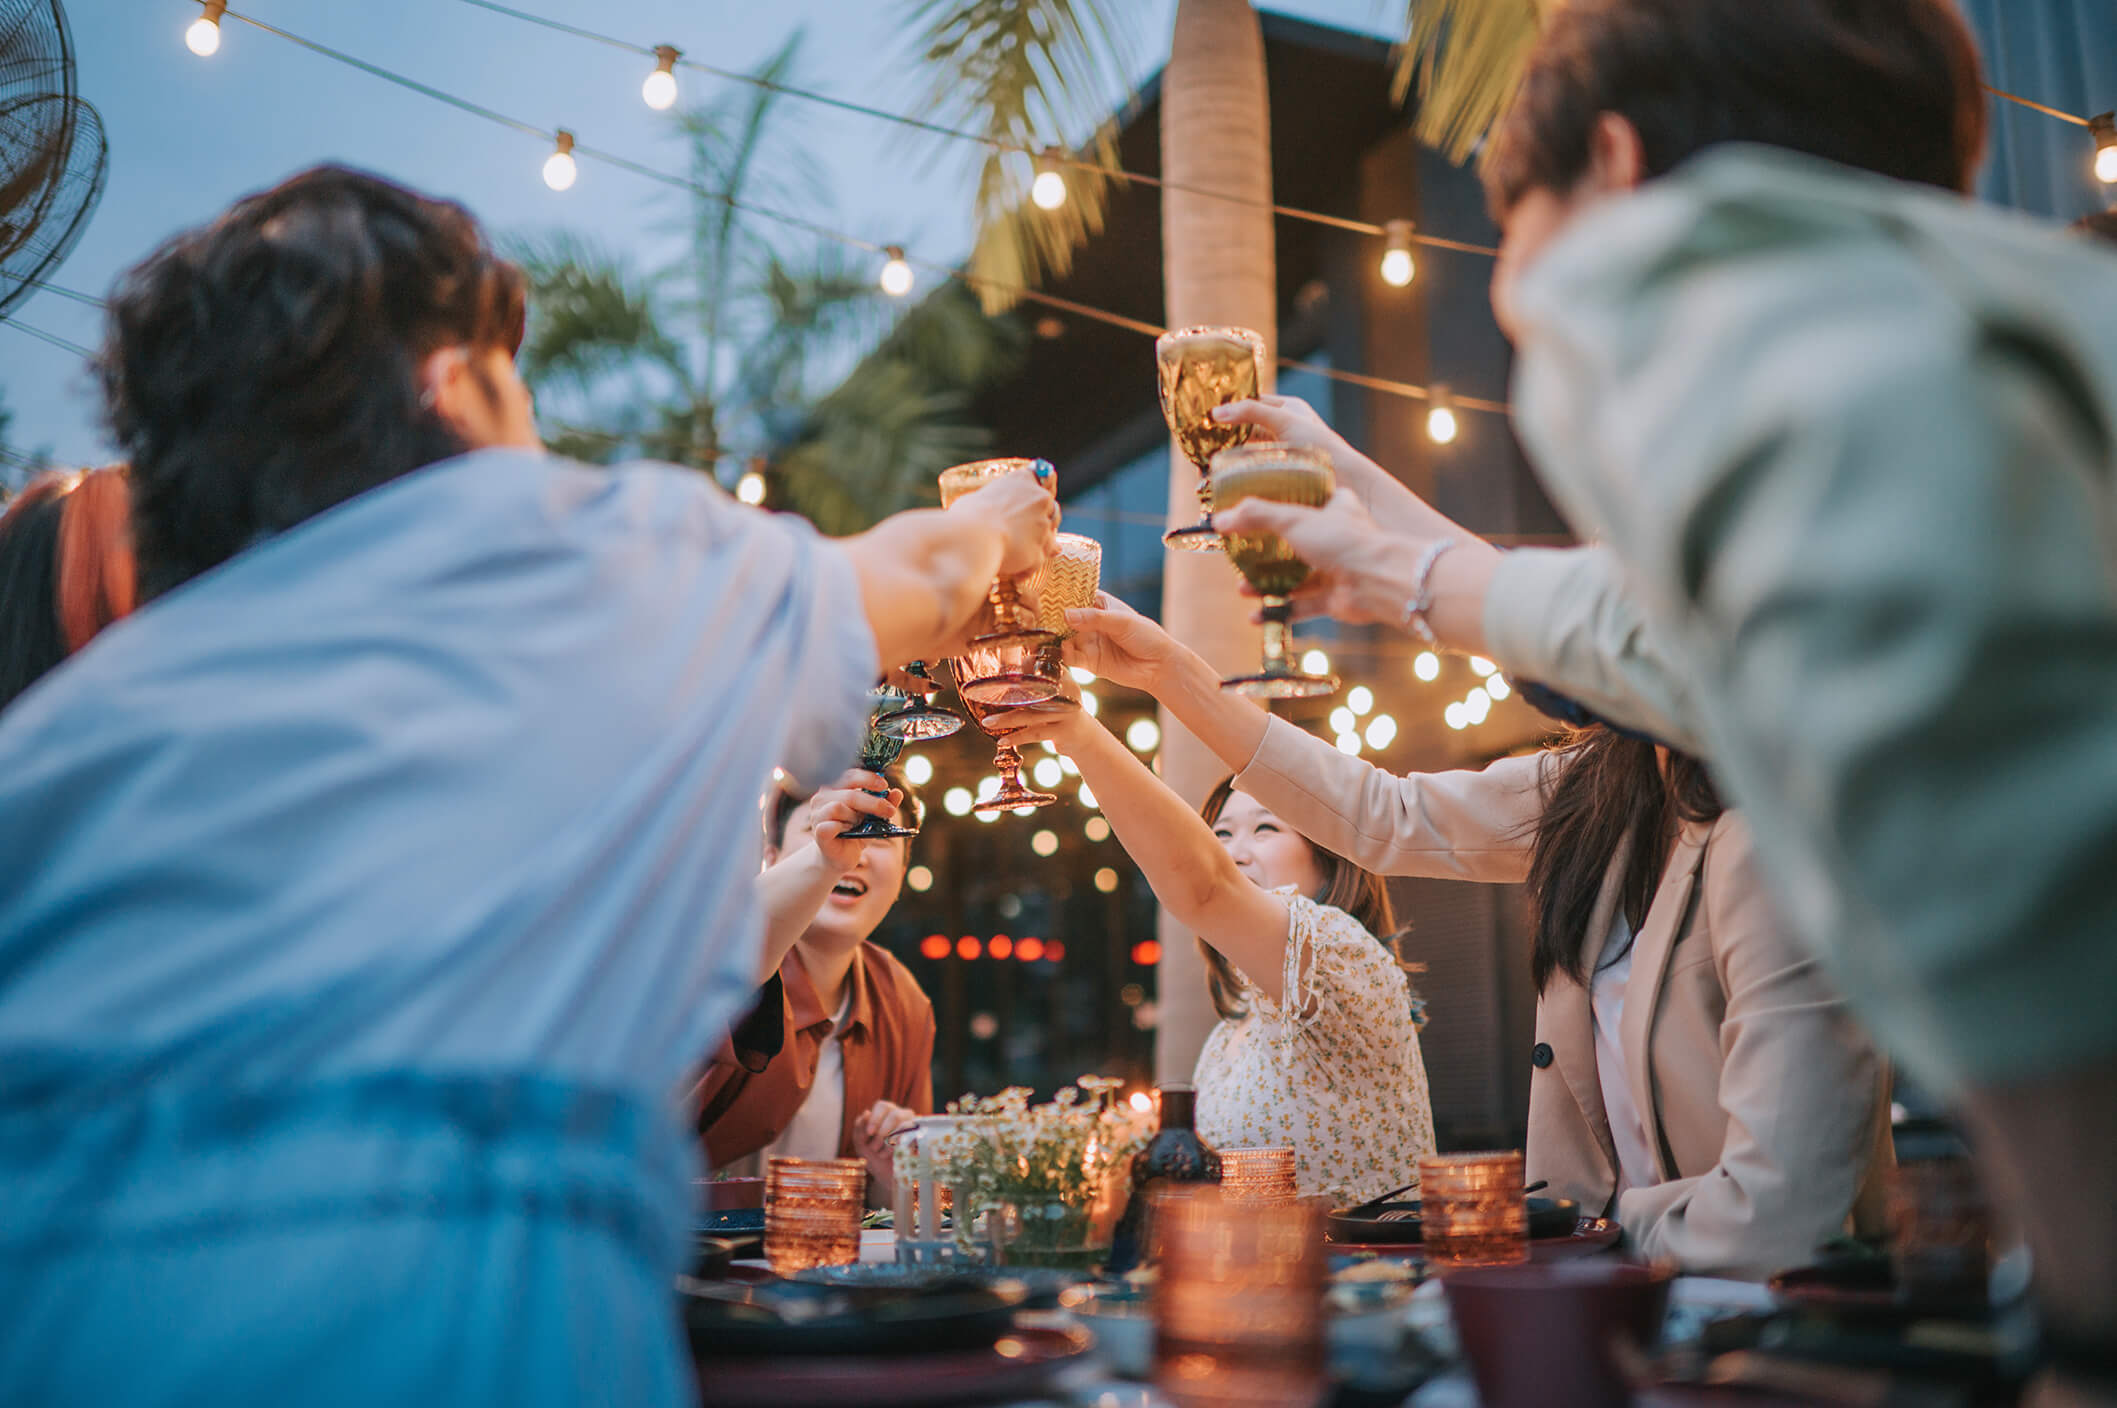 How to start party rental business in 2023